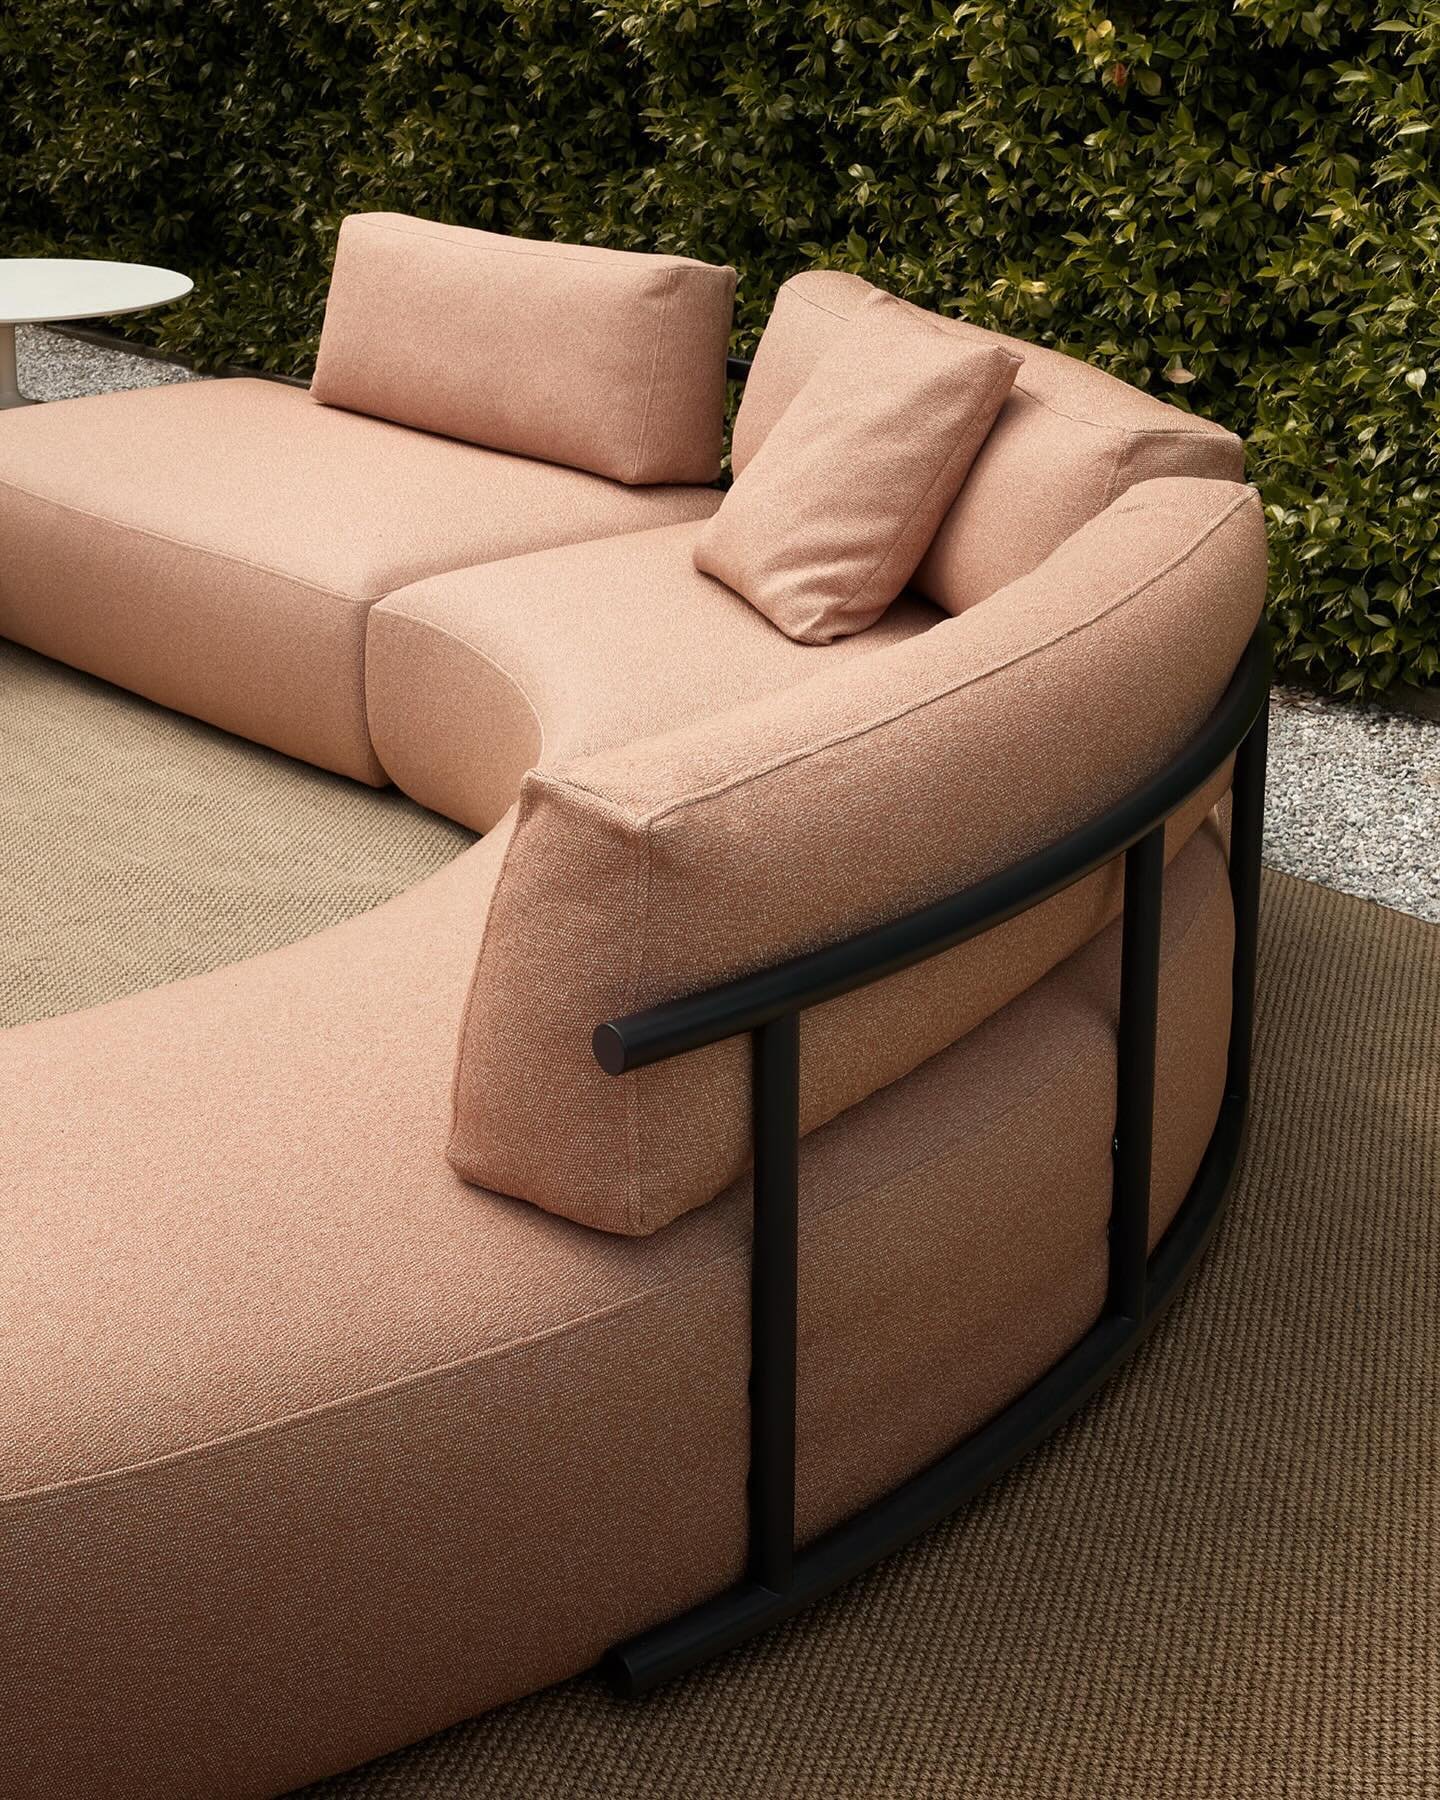 Outdoor modular sofa system with a painted stainless steel frame can be arranged in various configurations of seats and backs. Other outdoor upholstery options available @ GRAYE.

Designed by: Francesco Rota

&bull;
&bull;
&bull;
&bull;
&bull;

#mdfi